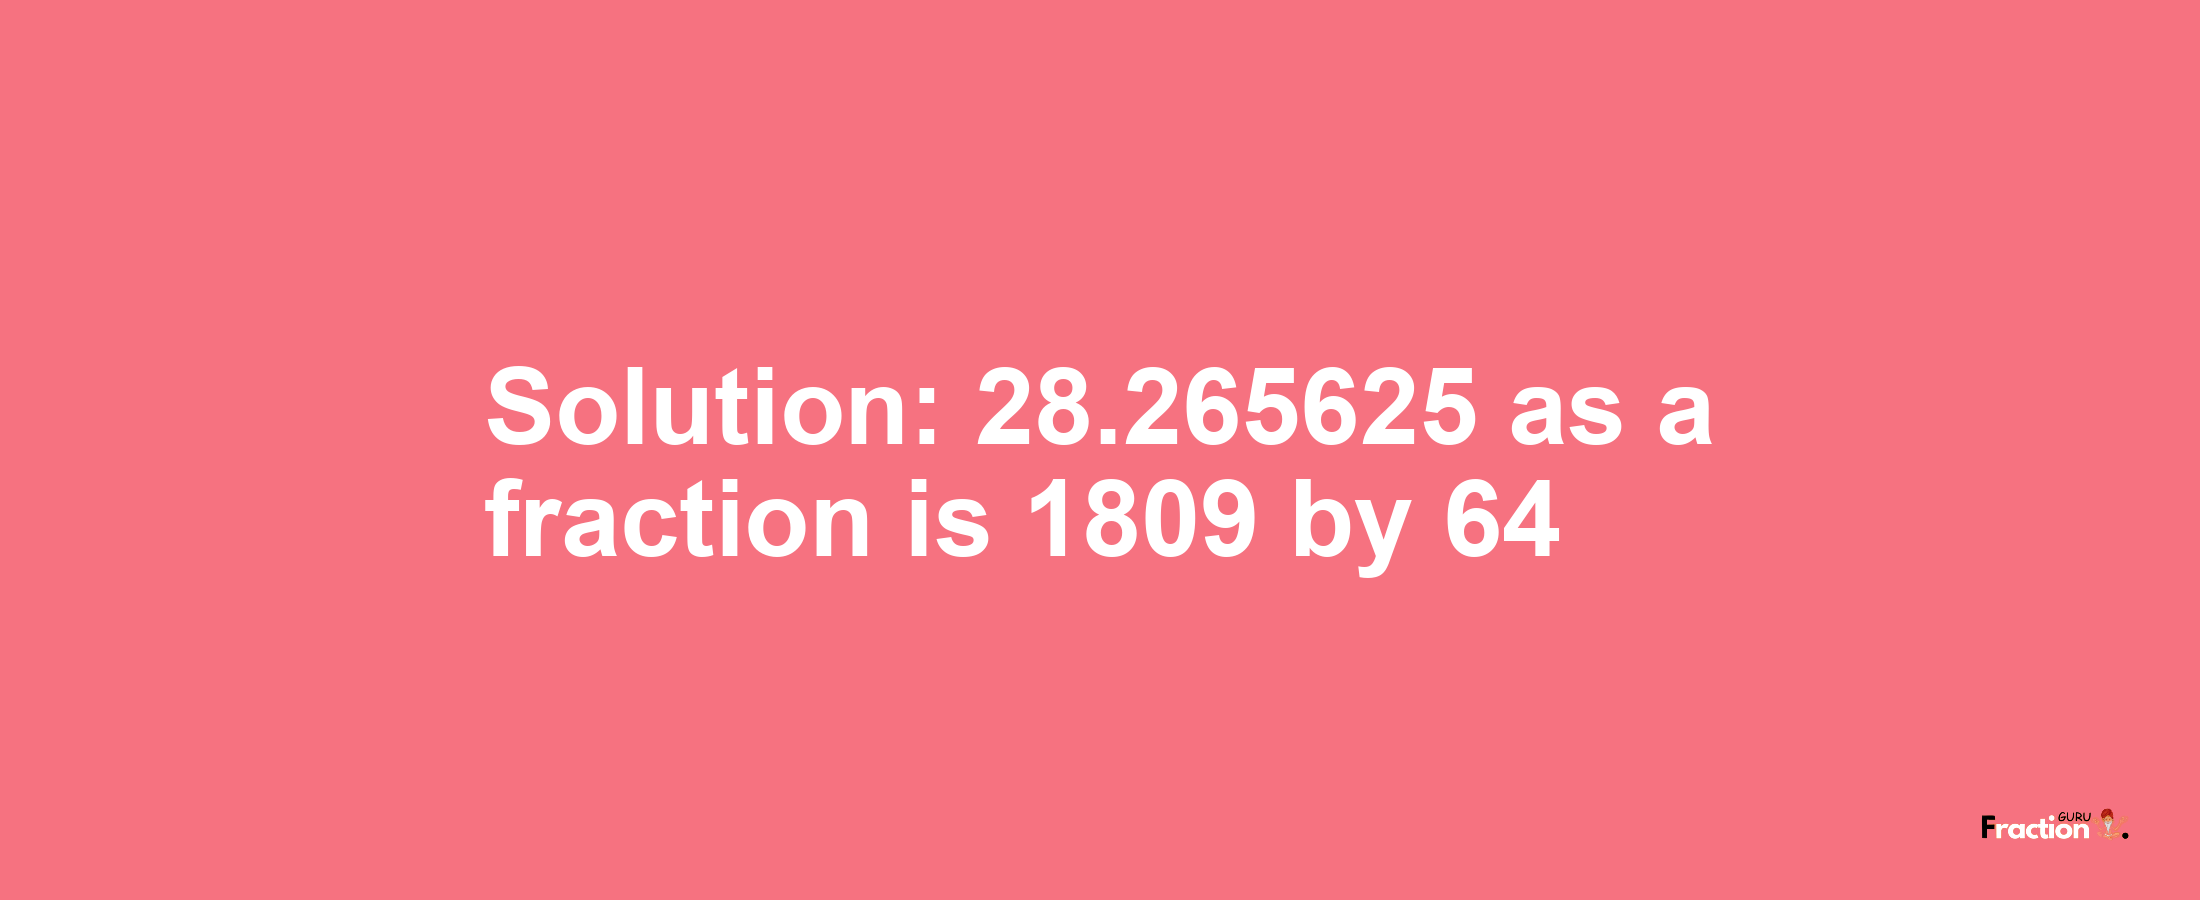 Solution:28.265625 as a fraction is 1809/64